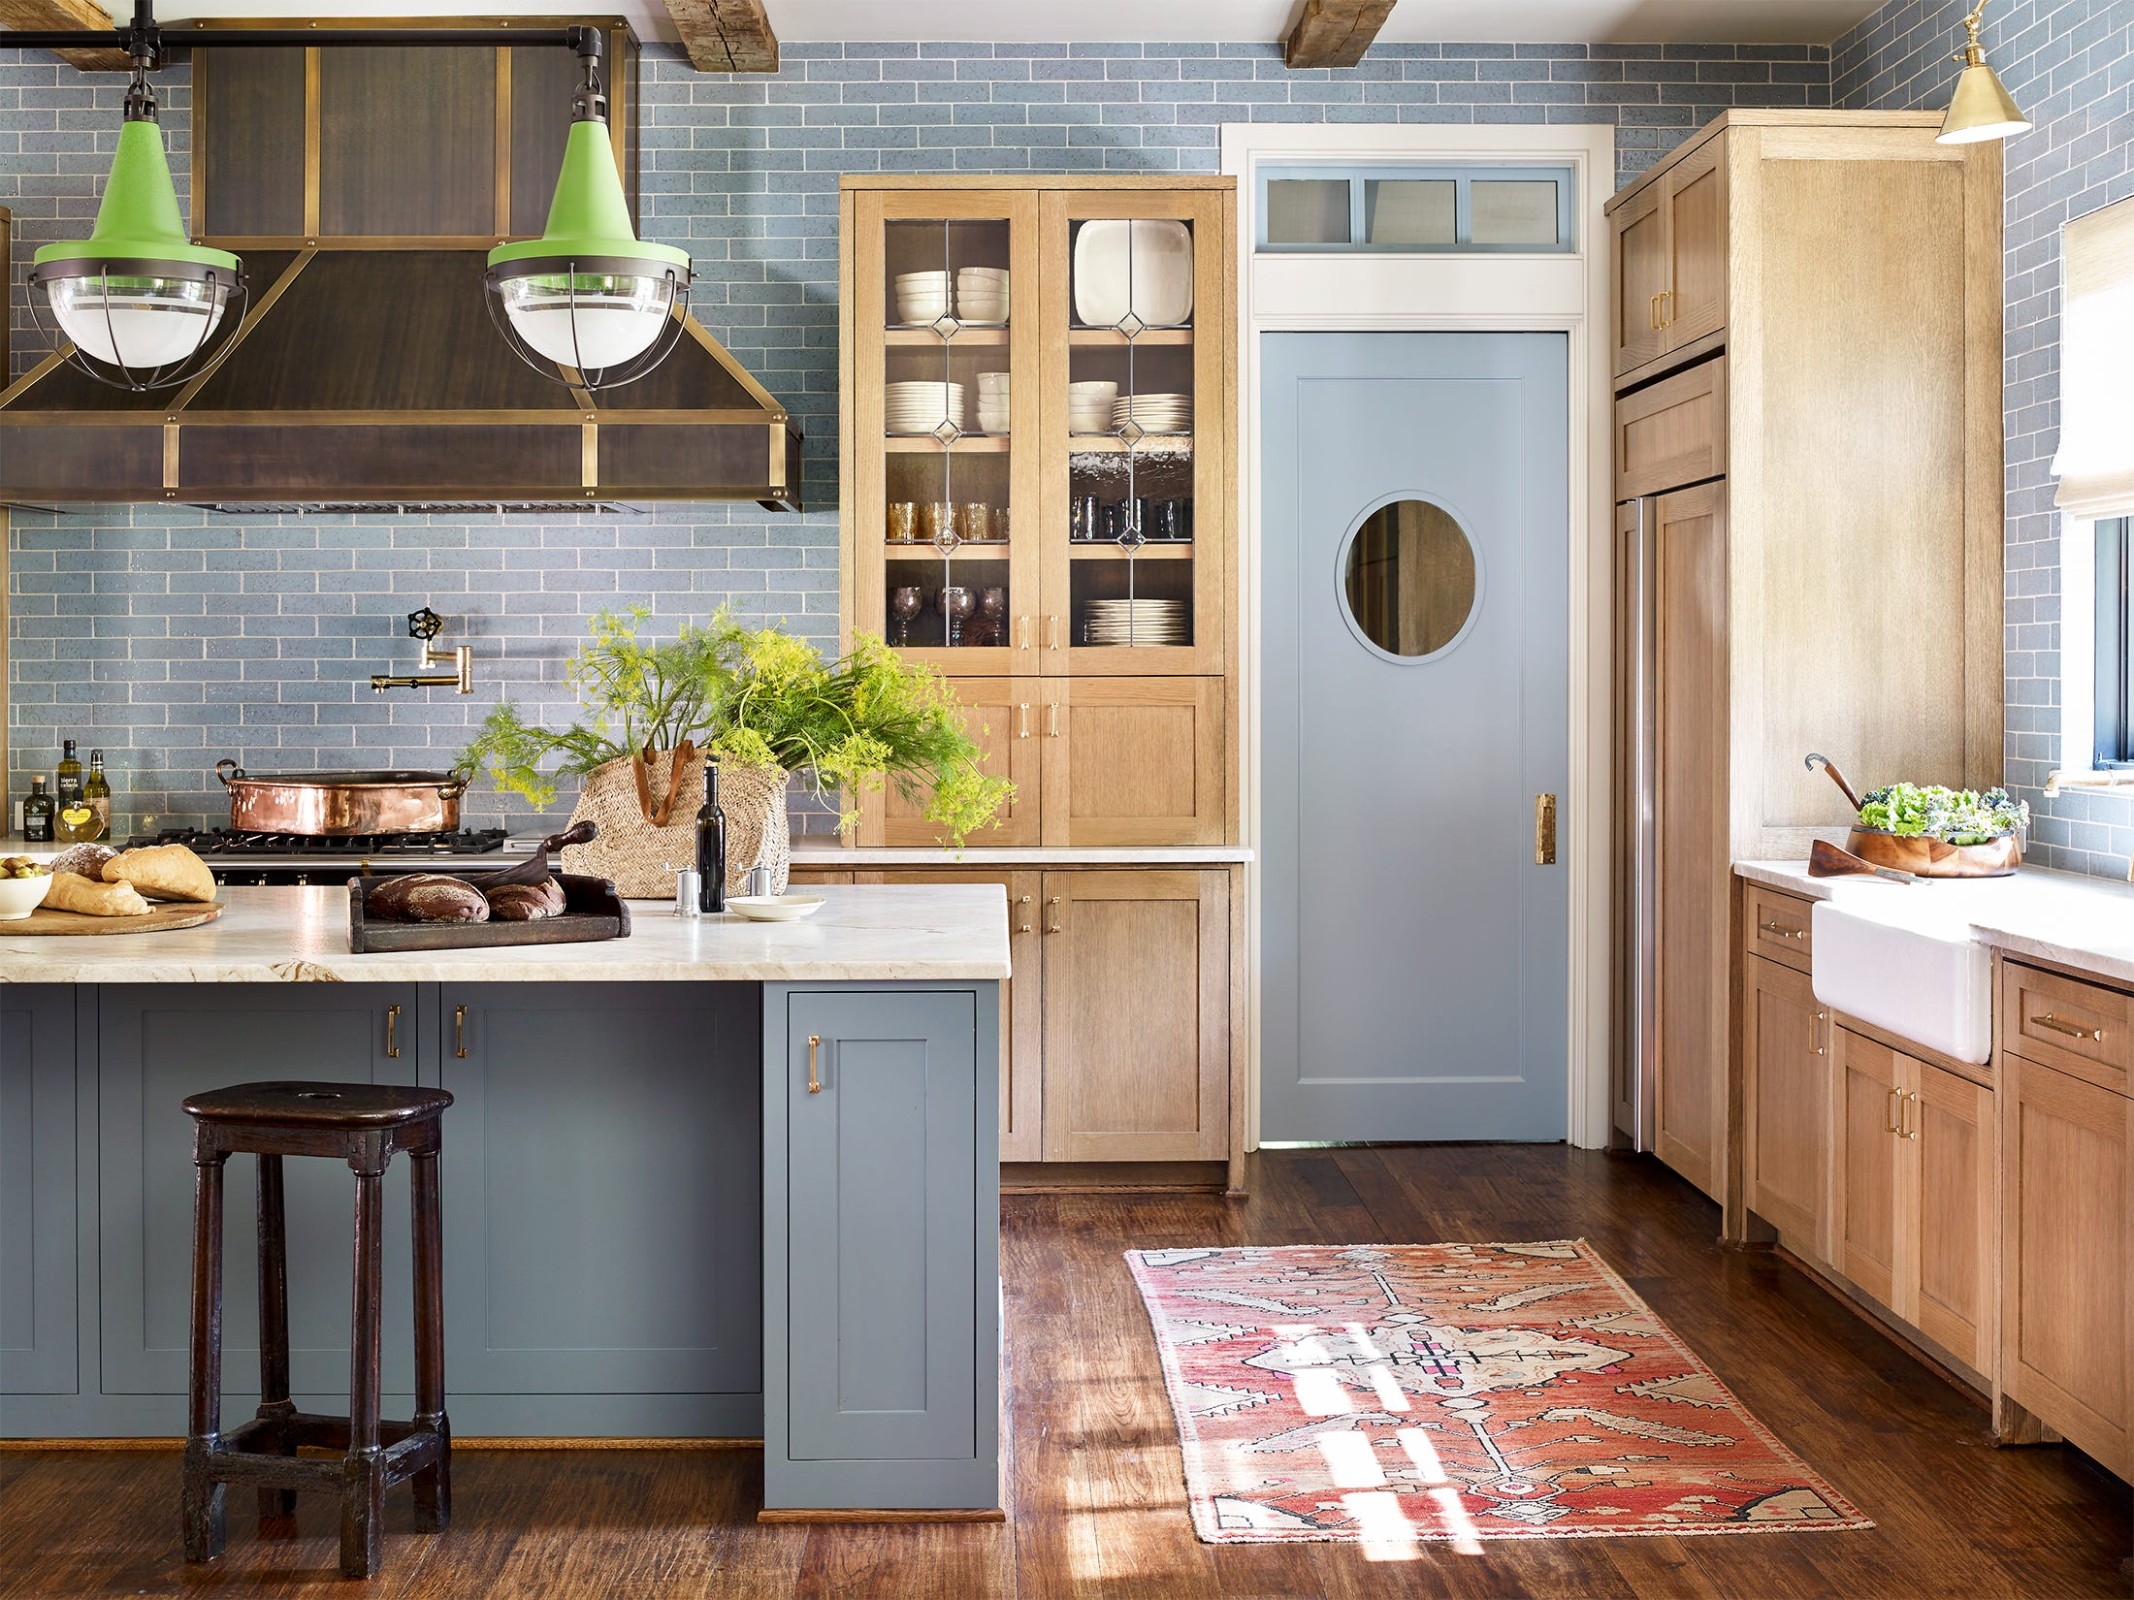 8 Best Kitchen Paint Colors - Ideas for Popular Kitchen Colors - what is a good color for a small kitchen?